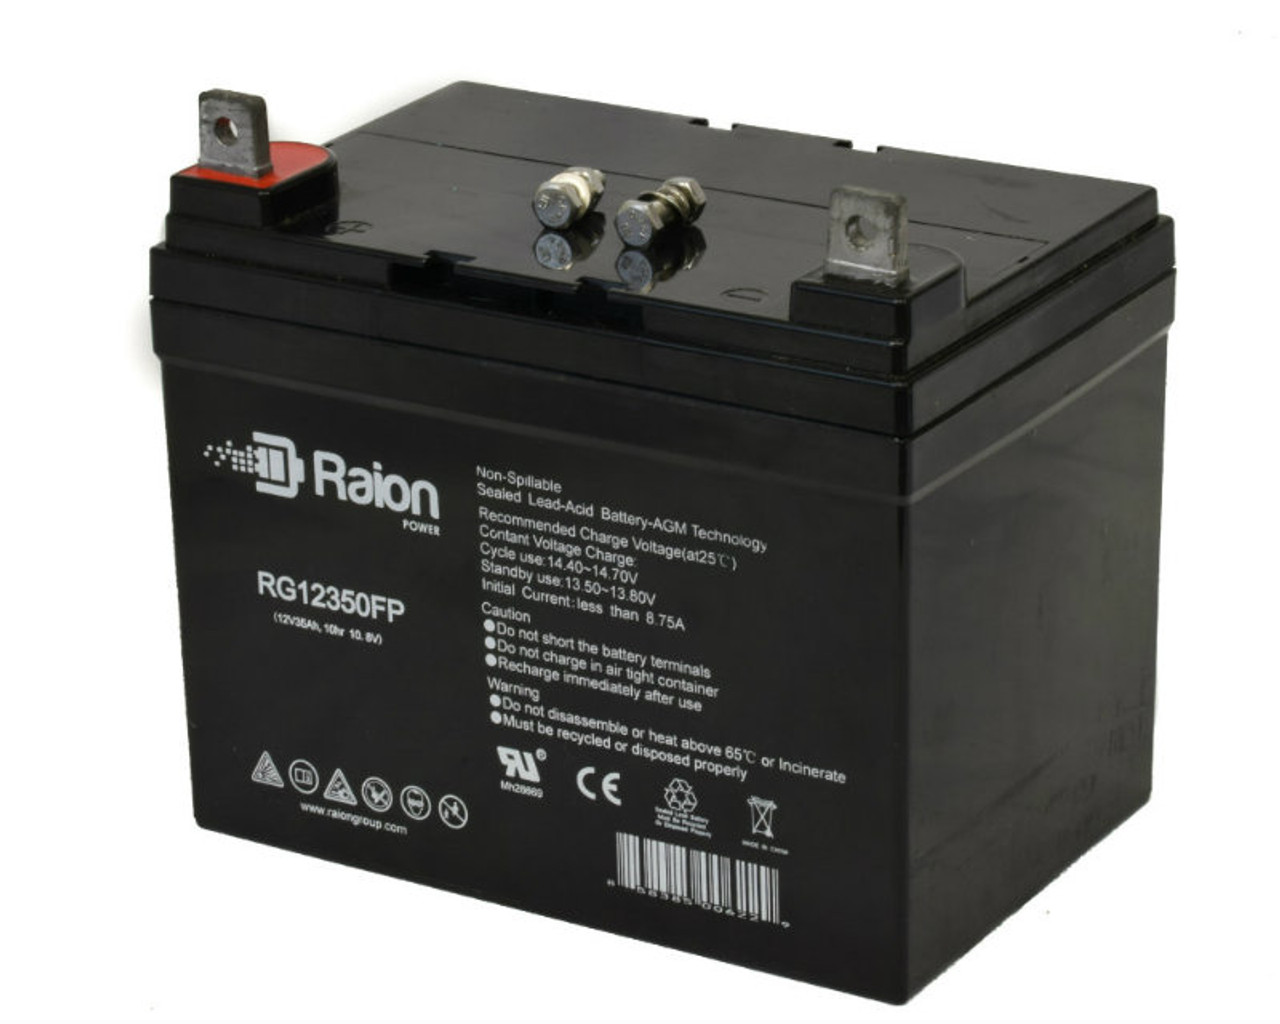 Raion Power Replacement 12V 35Ah RG12350FP Battery for Exmark Walk Behind